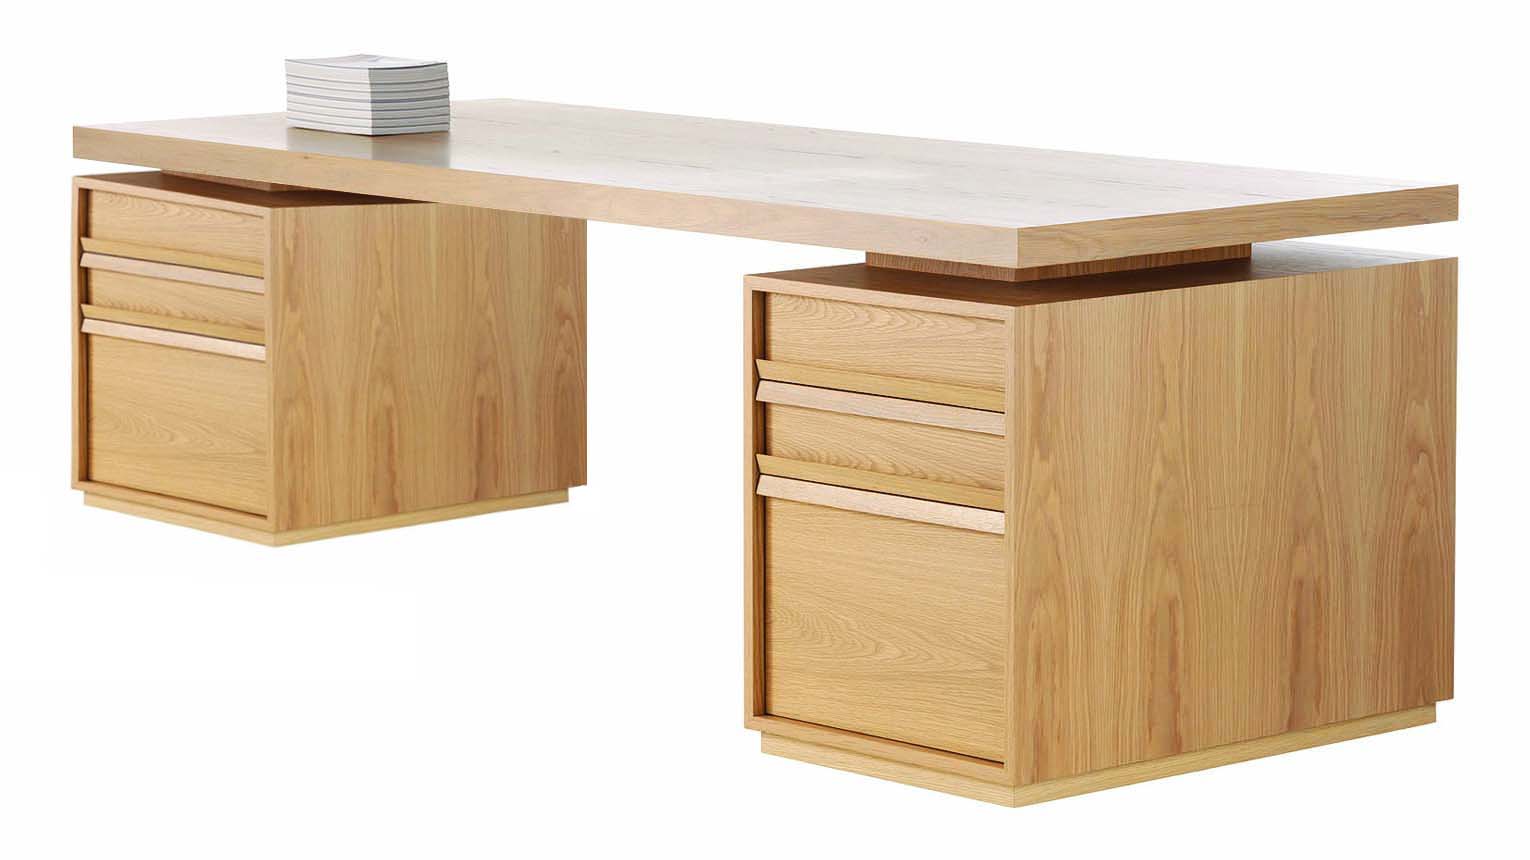 Hero Desk With File Drawers - Zuster Furniture